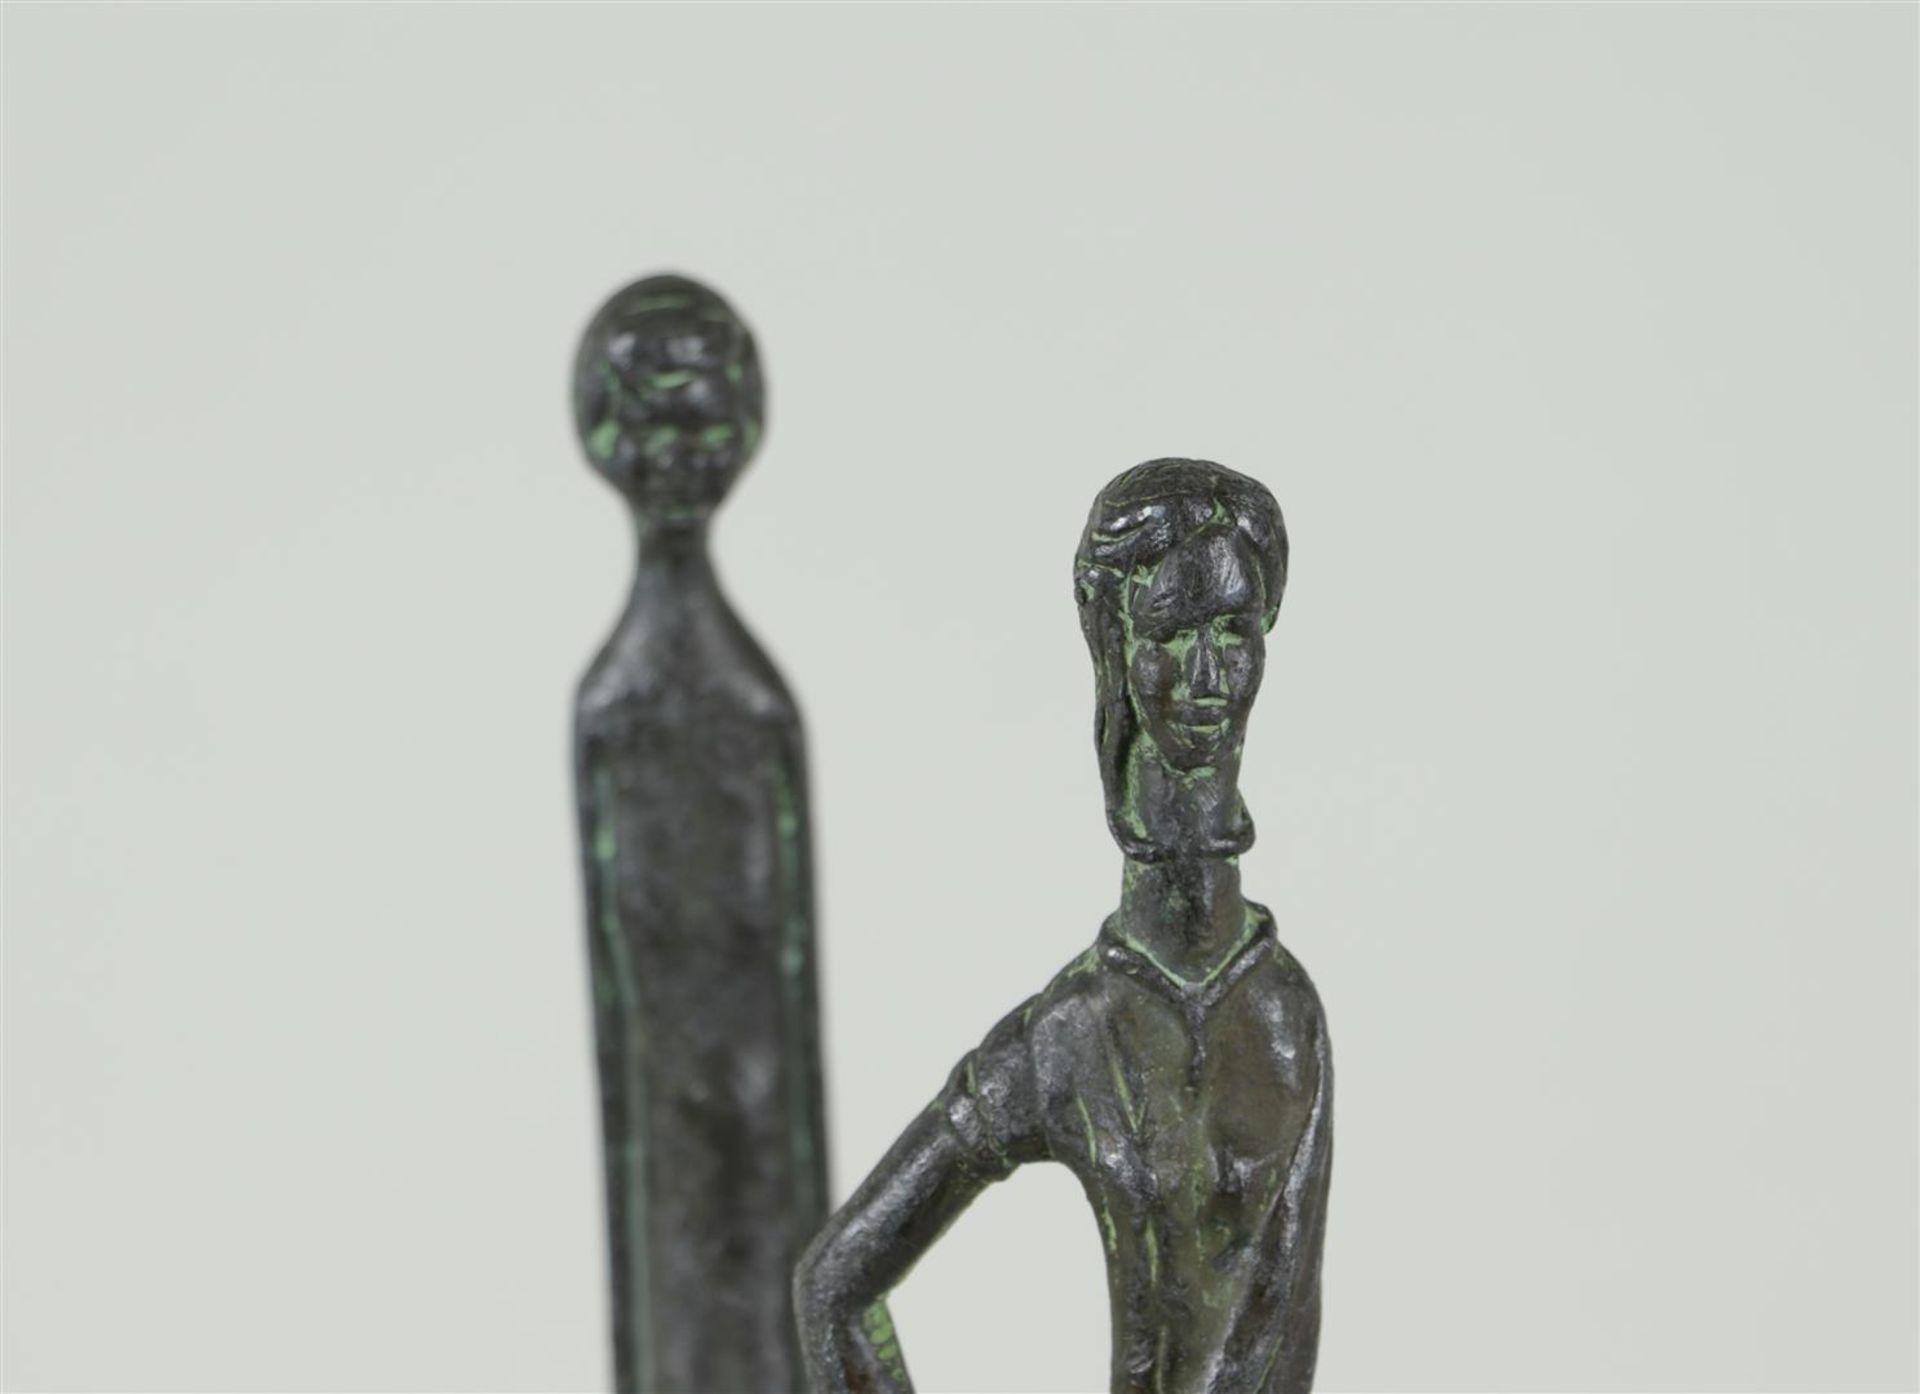 A few bronze sculptures; Adam and Eve, 20th century. - Image 3 of 3